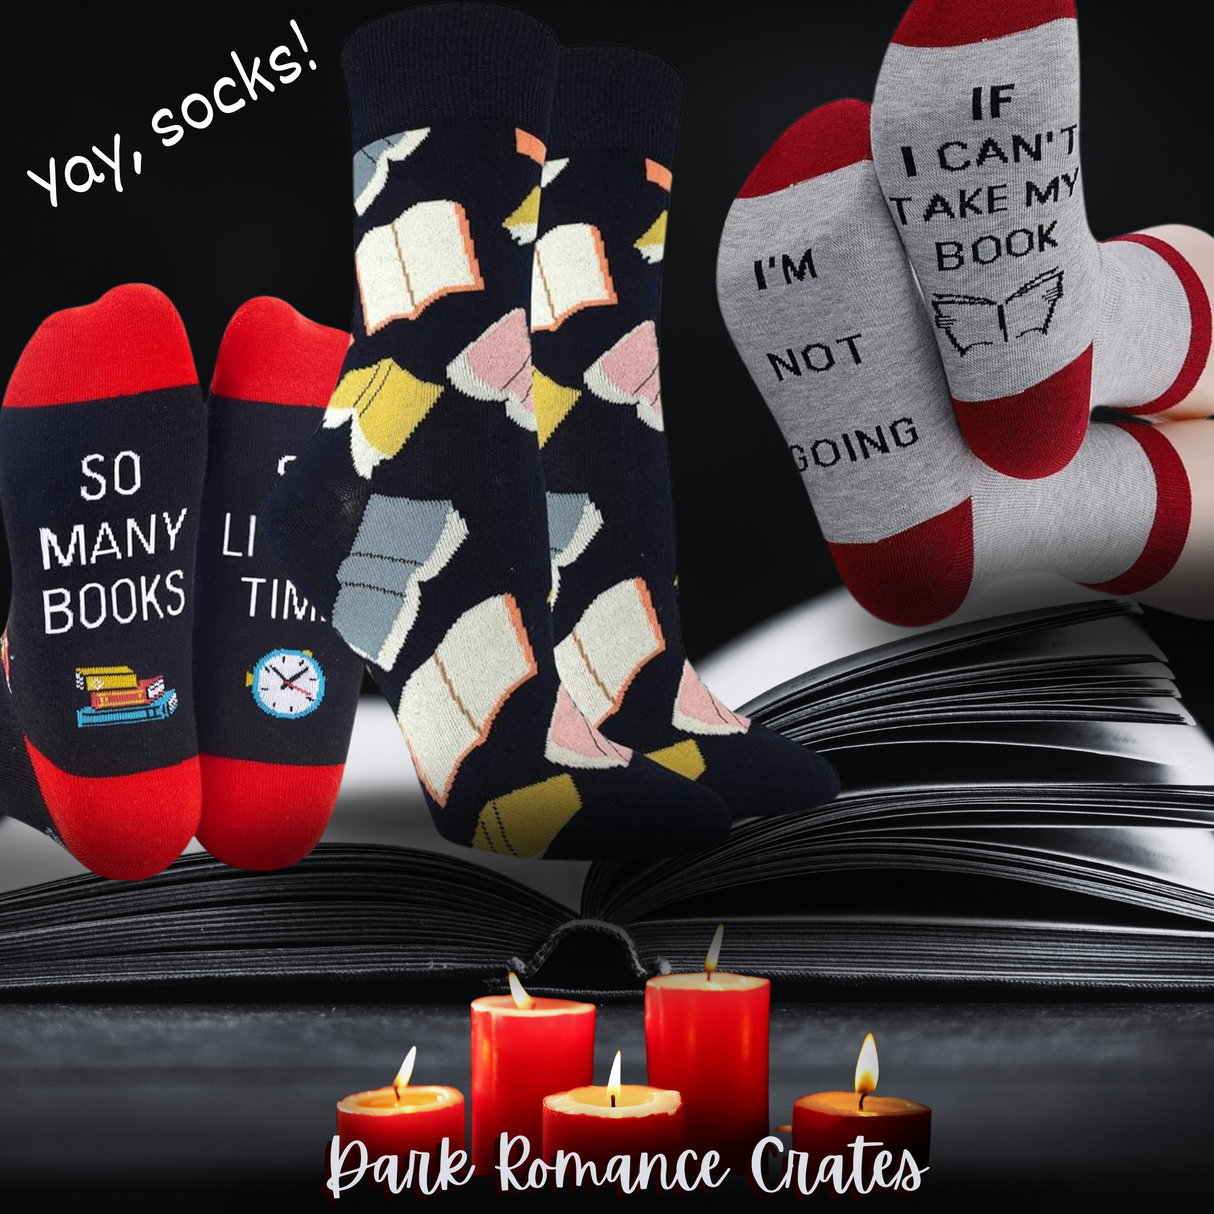 Add-On Bookish Socks! Receive a random selection of bookish socks added to your dark romance crate.